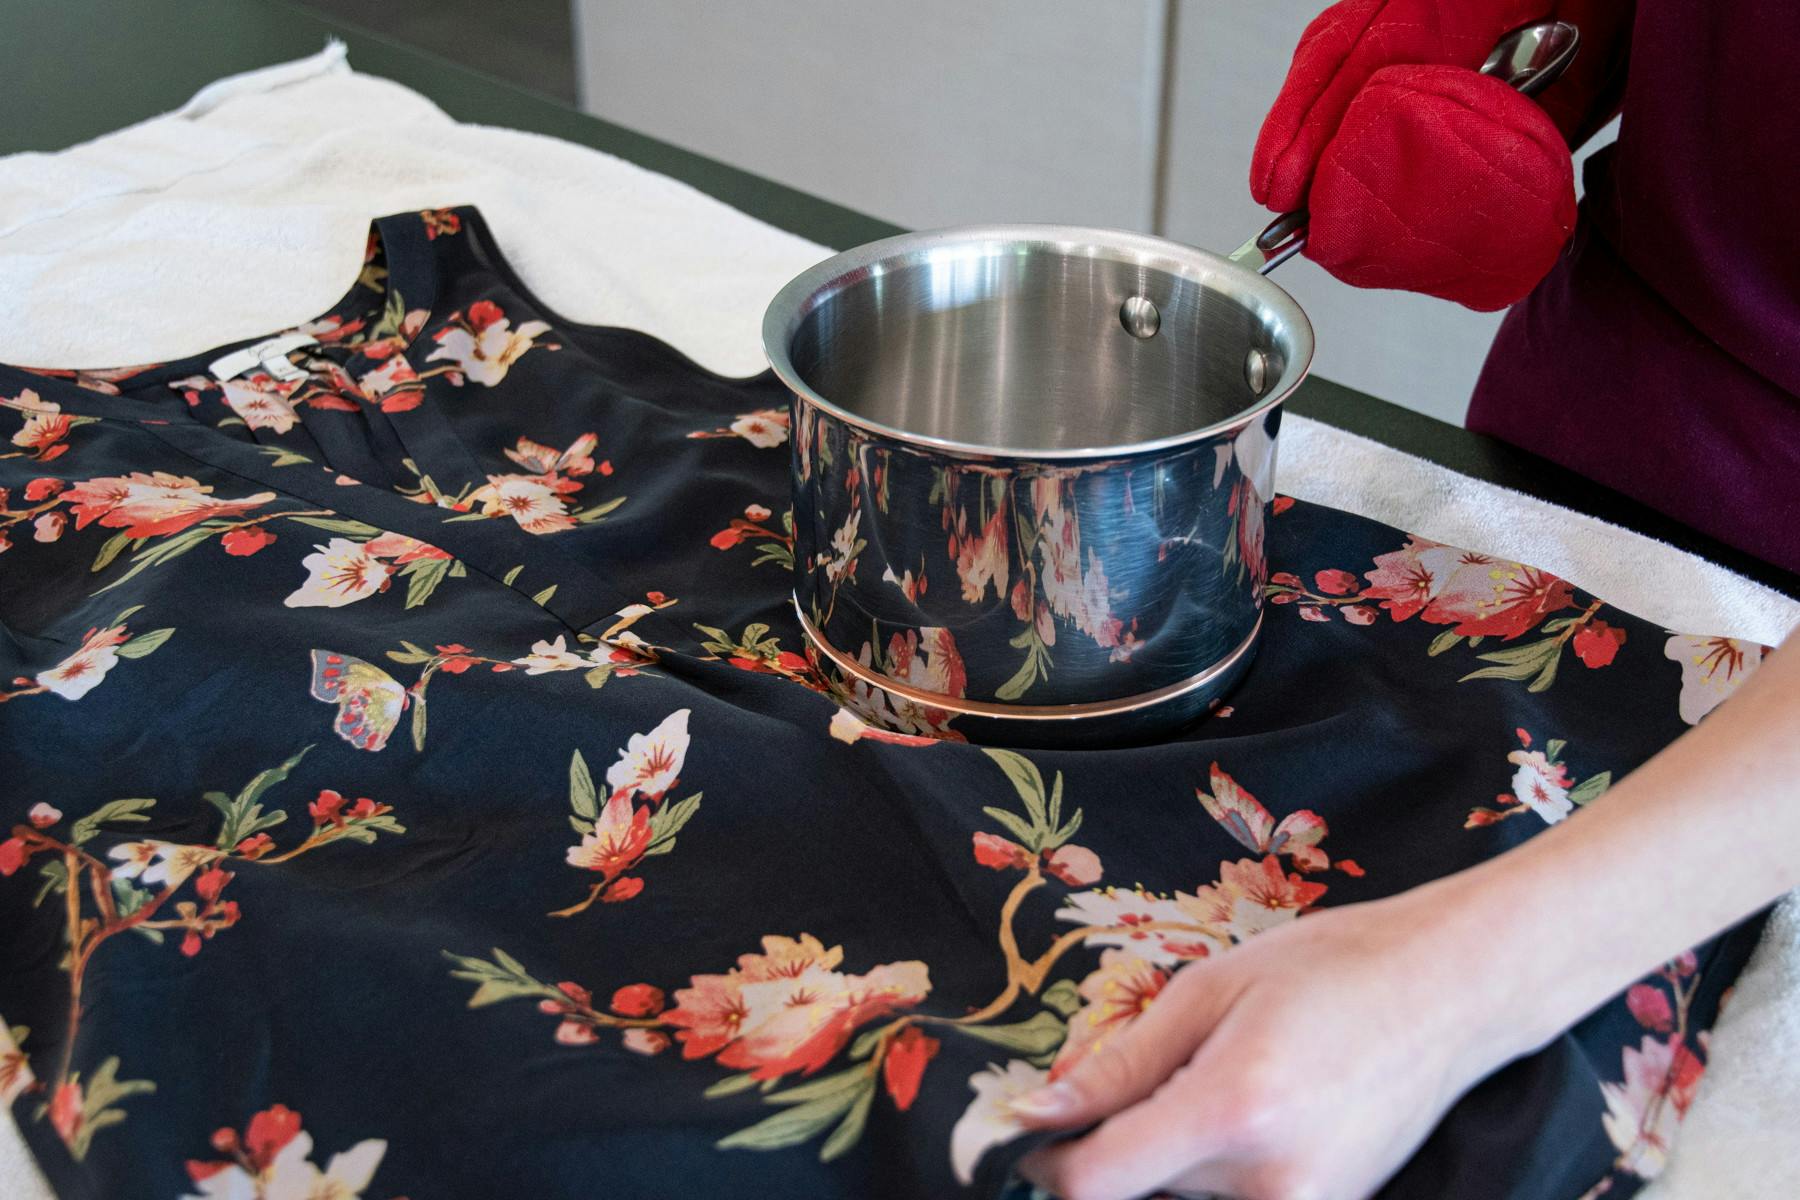 A hot pot being held over a wrinkled shirt.